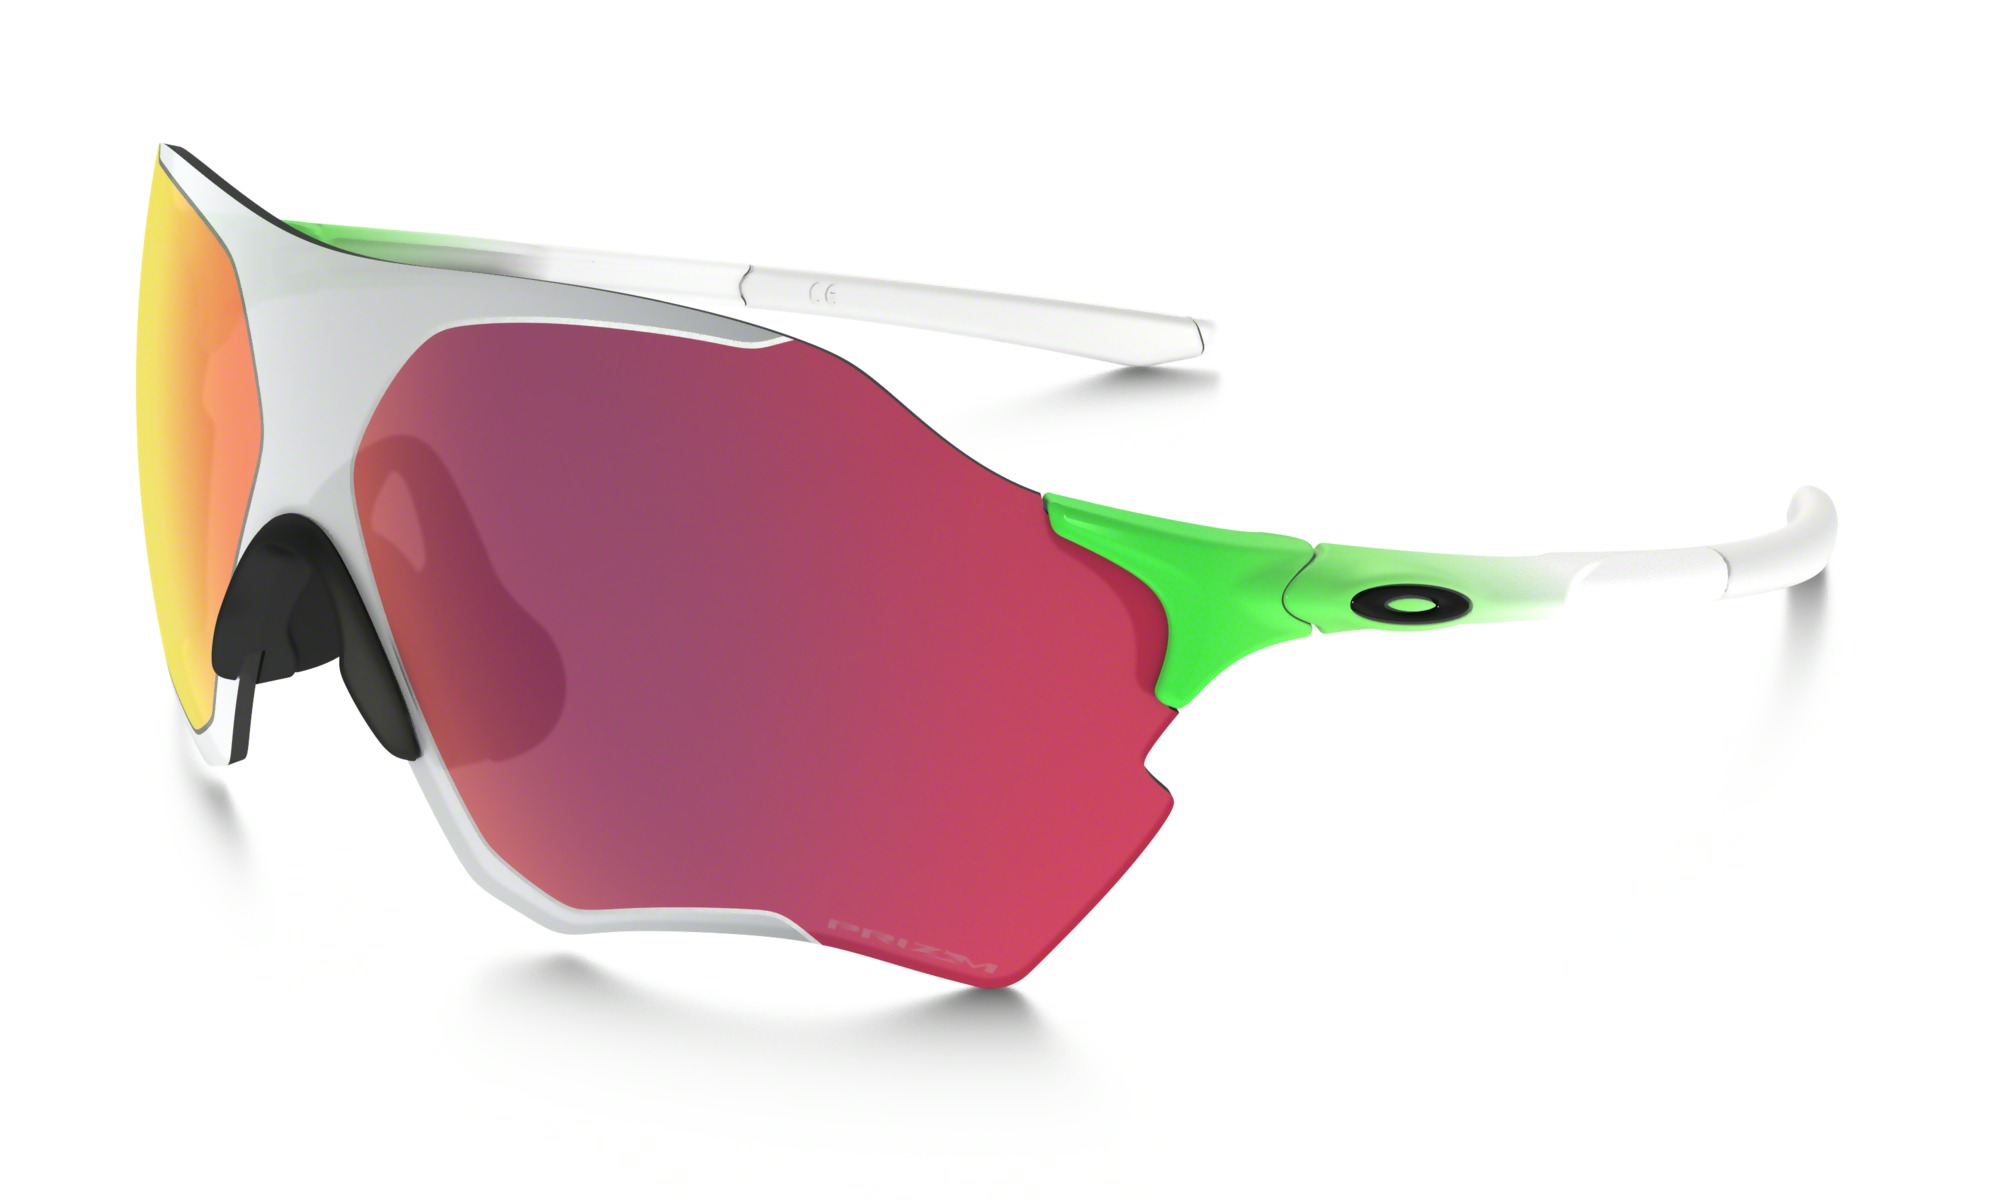 Oakley gears up for the 2016 Summer Olympics with the Team USA